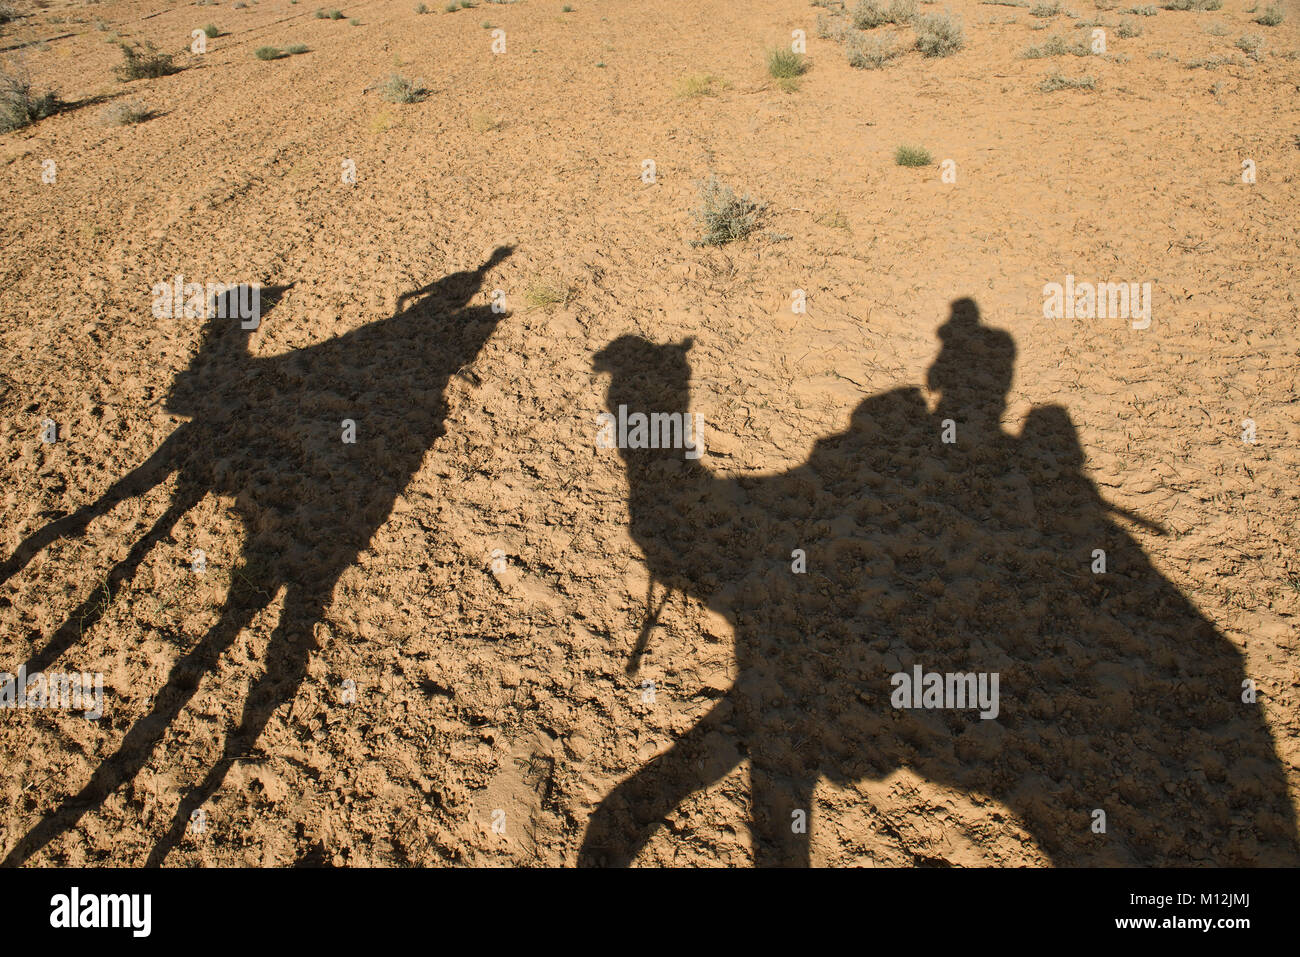 Camel shadows in the Thar Desert, Rajasthan, India Stock Photo